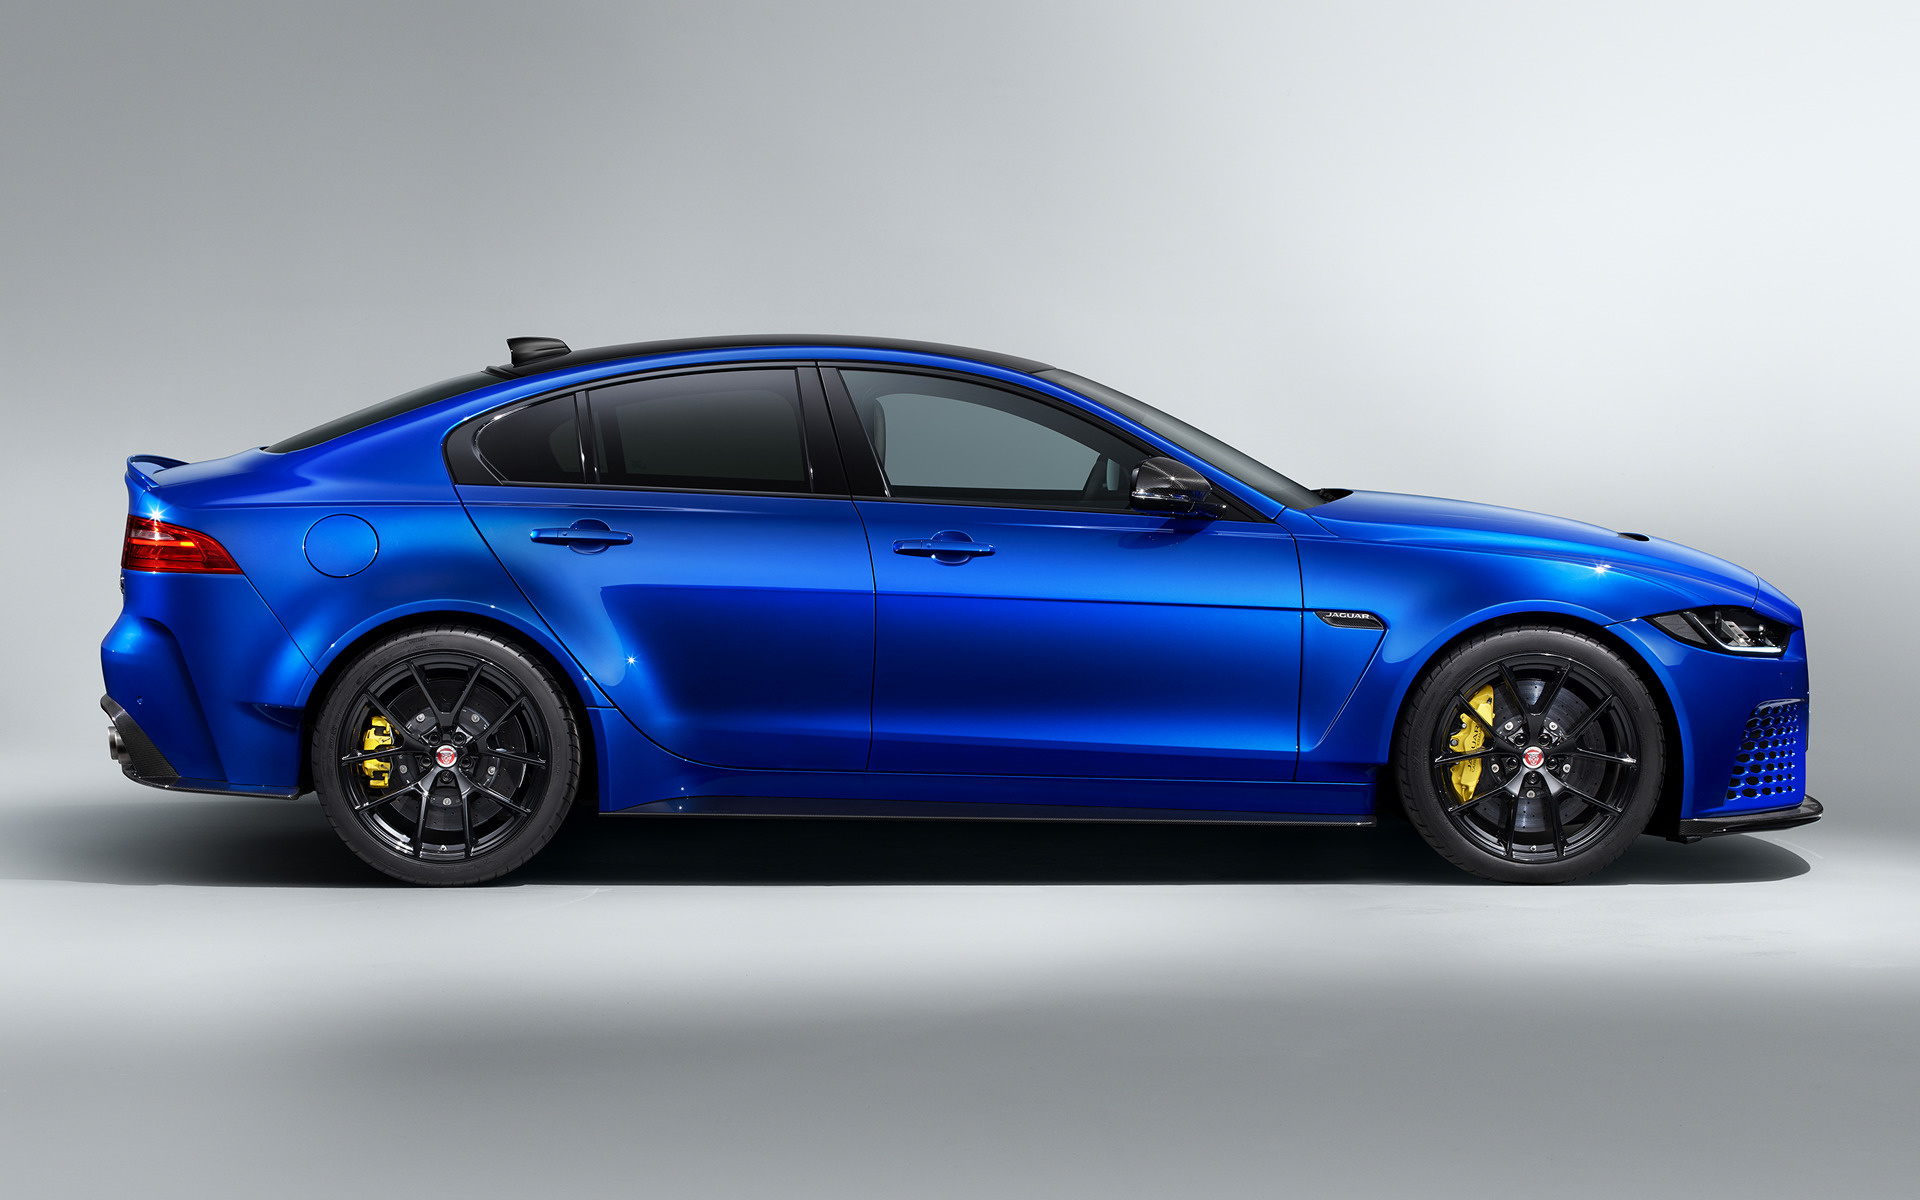 Jaguar XE SV Project 8 Touring and HD Image